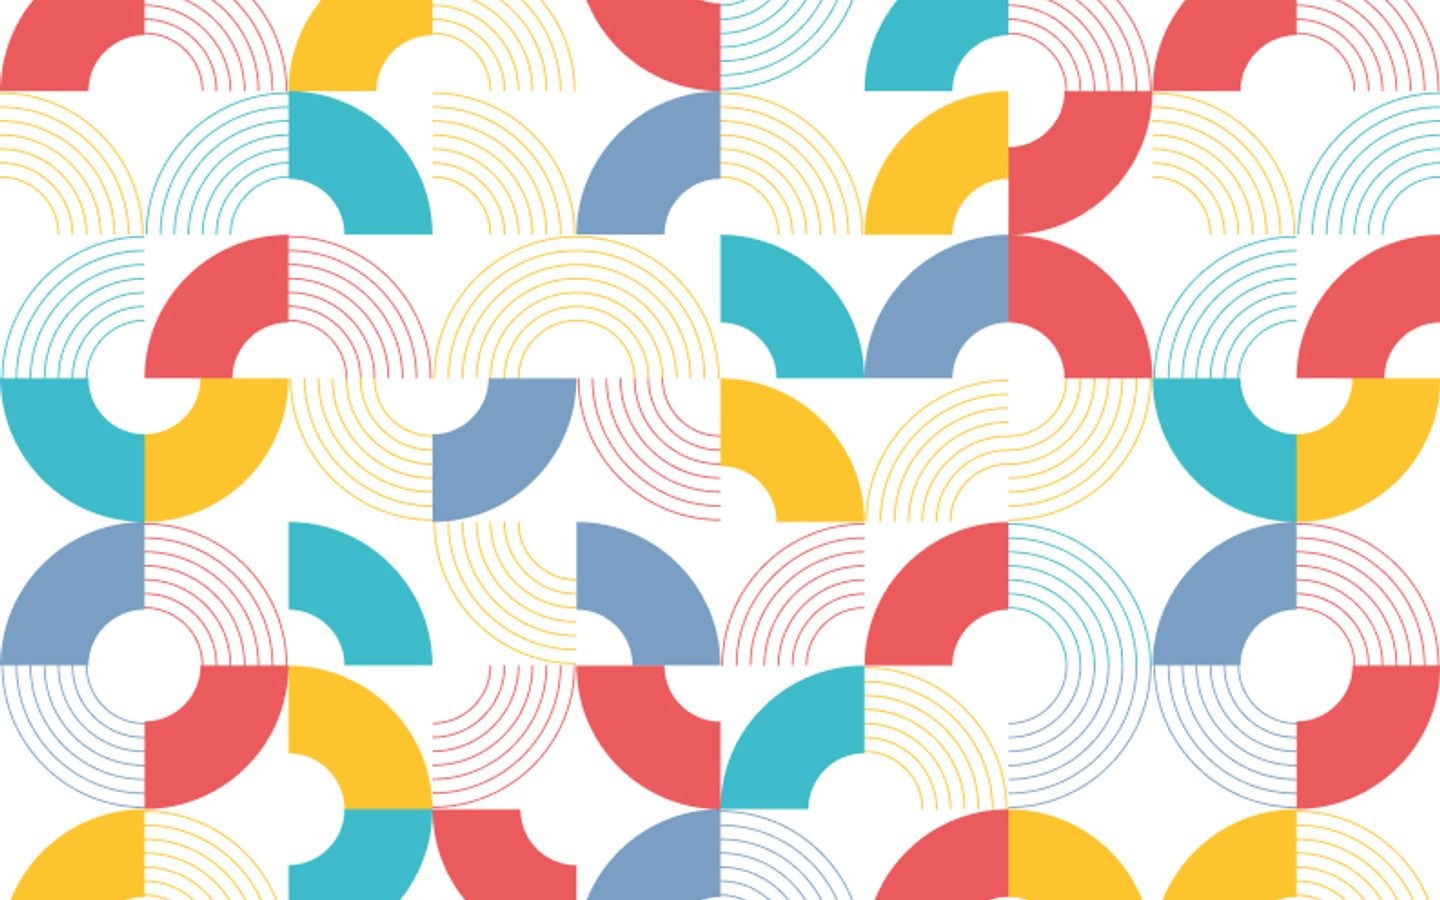 Repeating circular pattern assets using Newcastle Common brand colours.